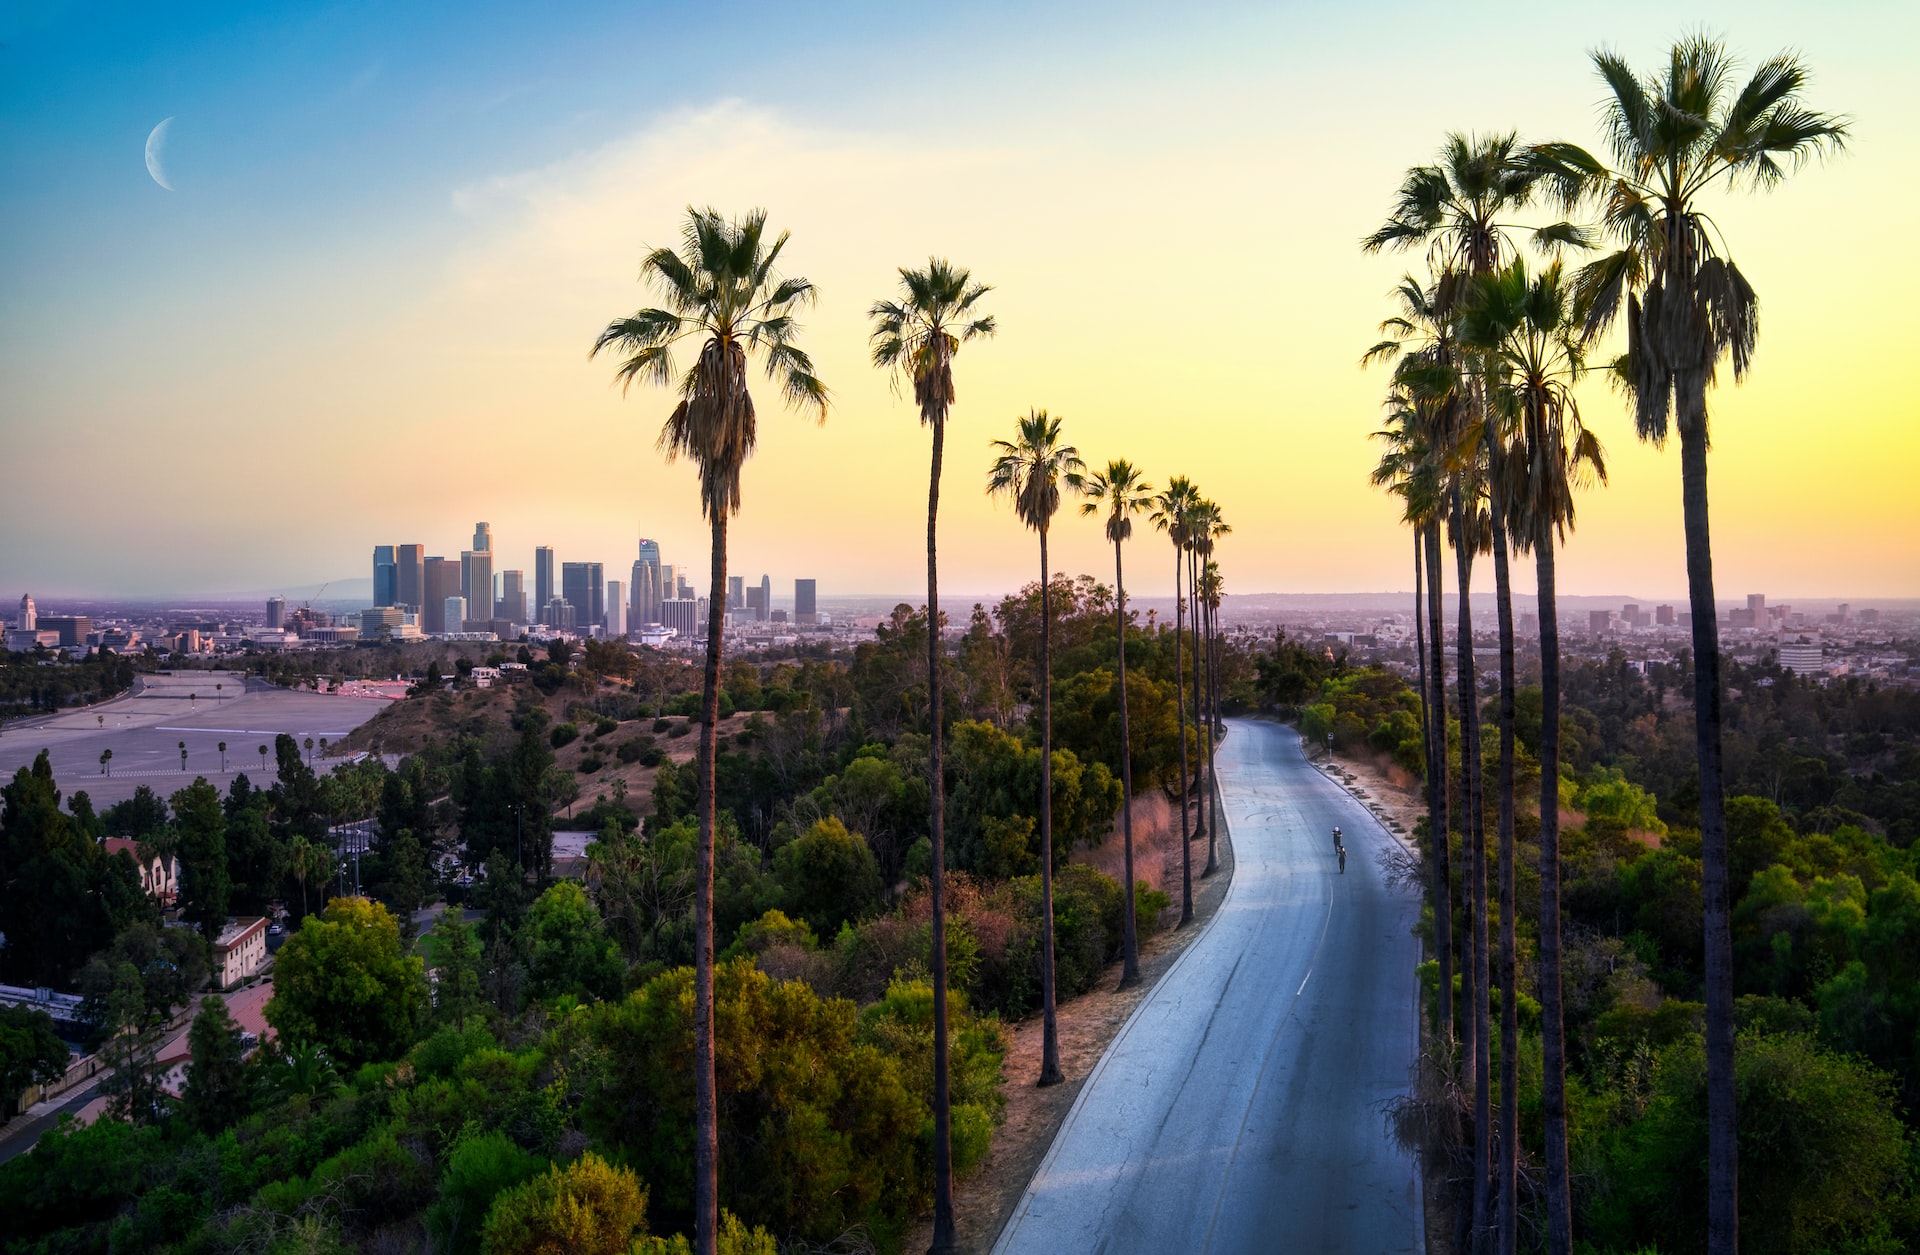 Road with palm trees with Los Angeles in the background.